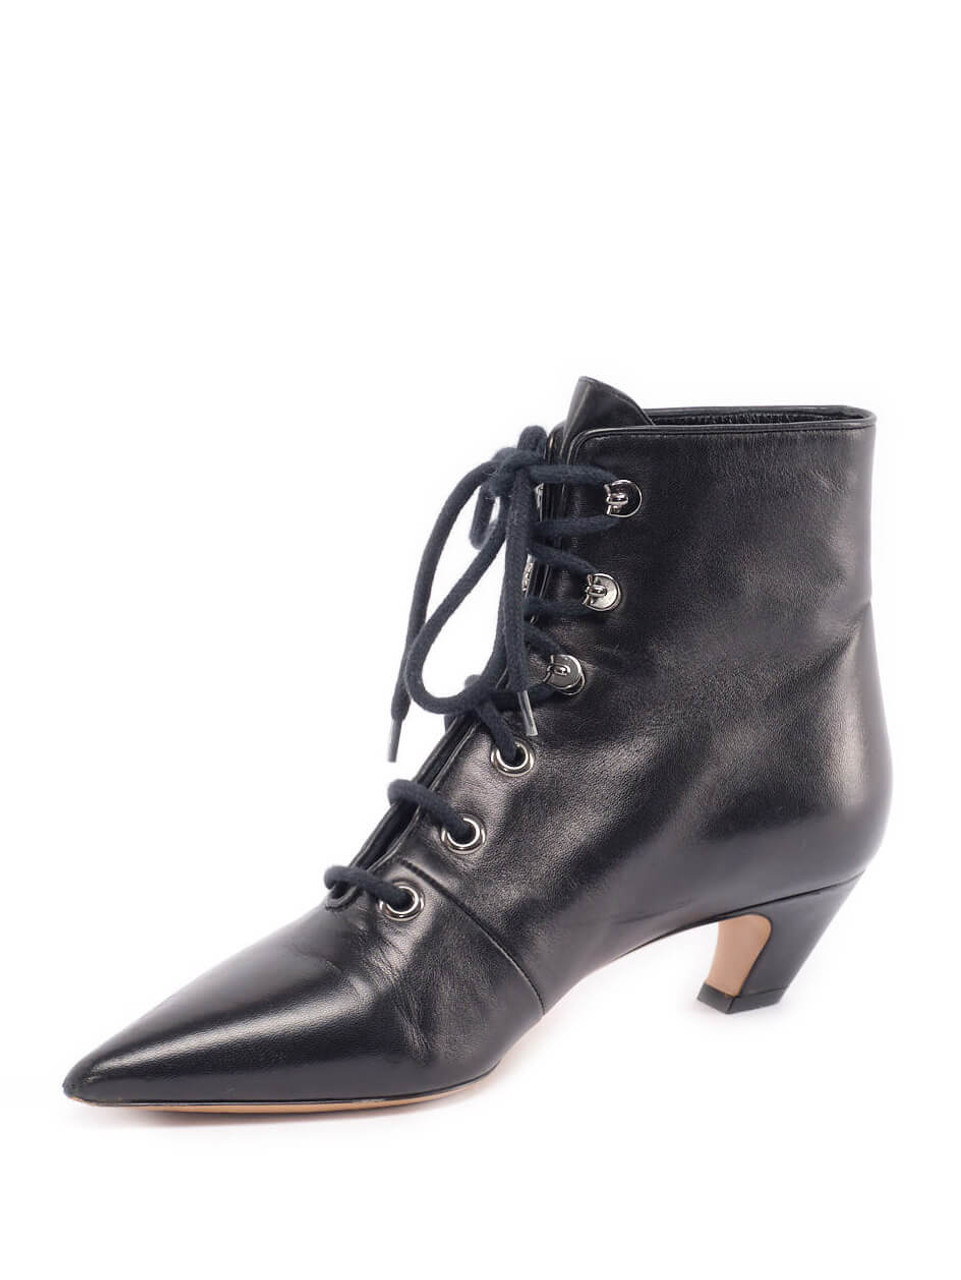 CHRISTIAN DIOR Leather Lace Up Shoes Black  Luxity